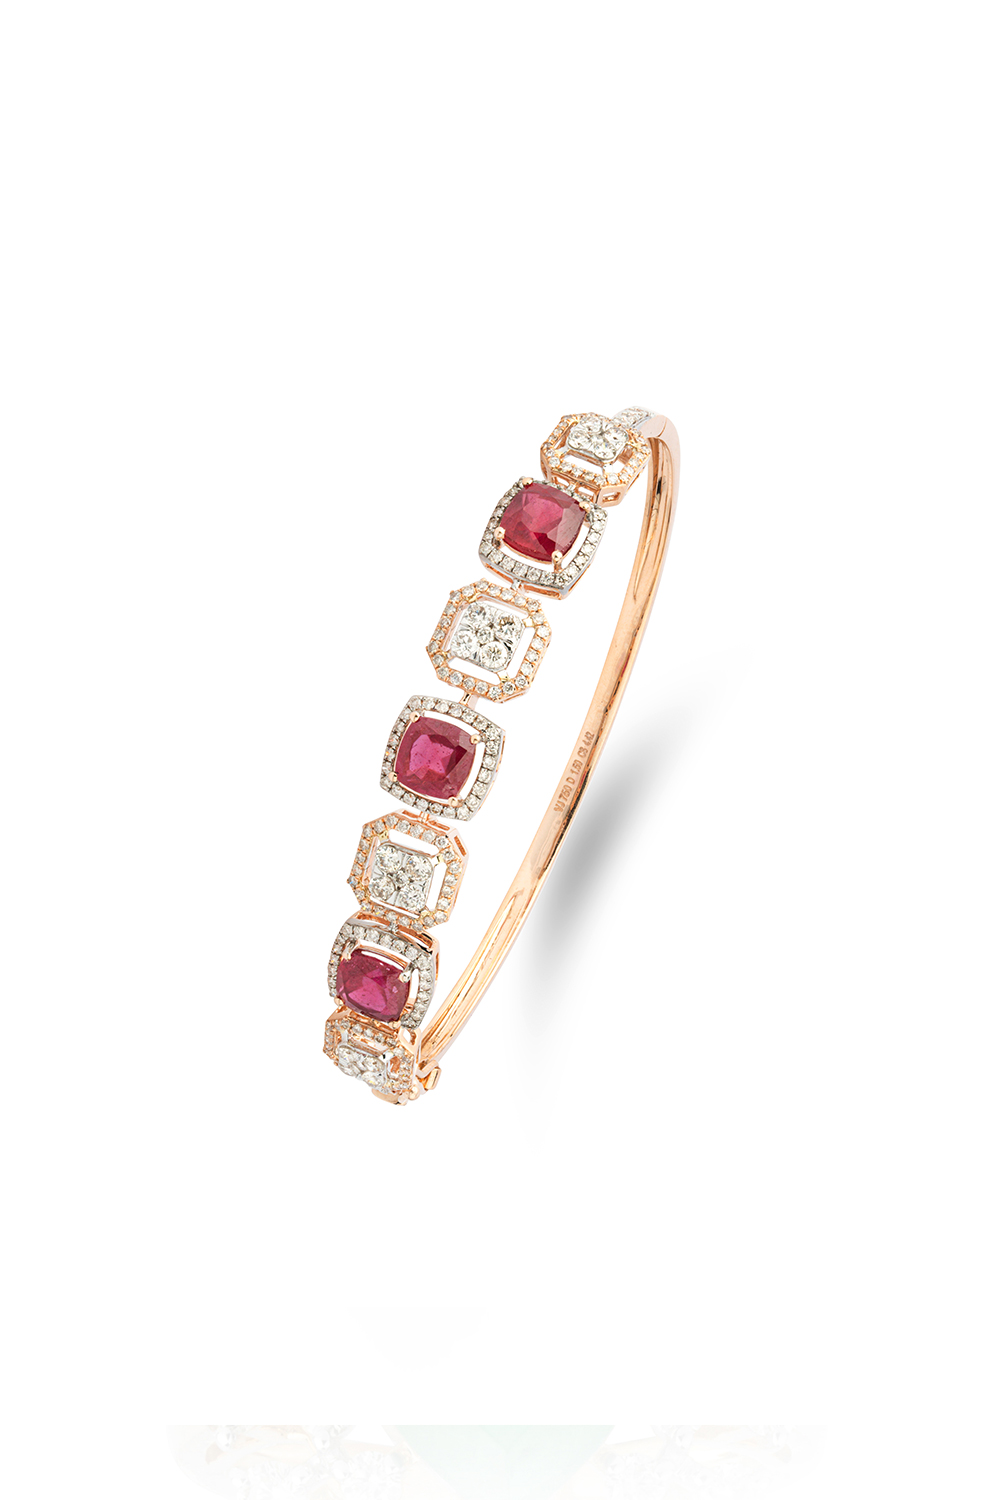 Natural ruby and natural diamond bracelet in 18k gold